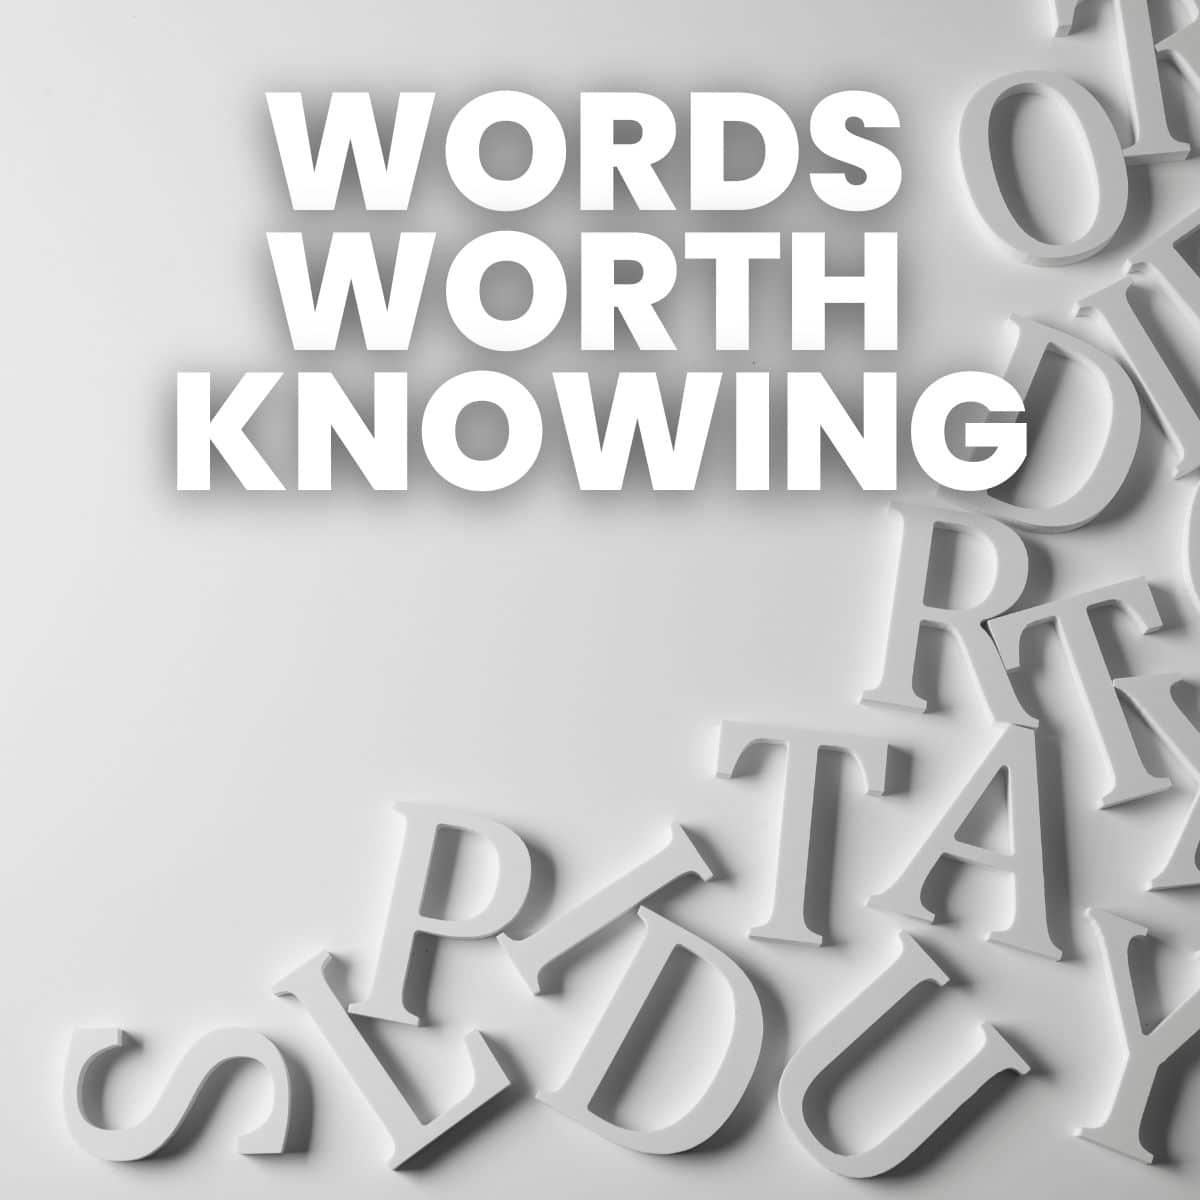 text of "words worth knowing" with letters in background